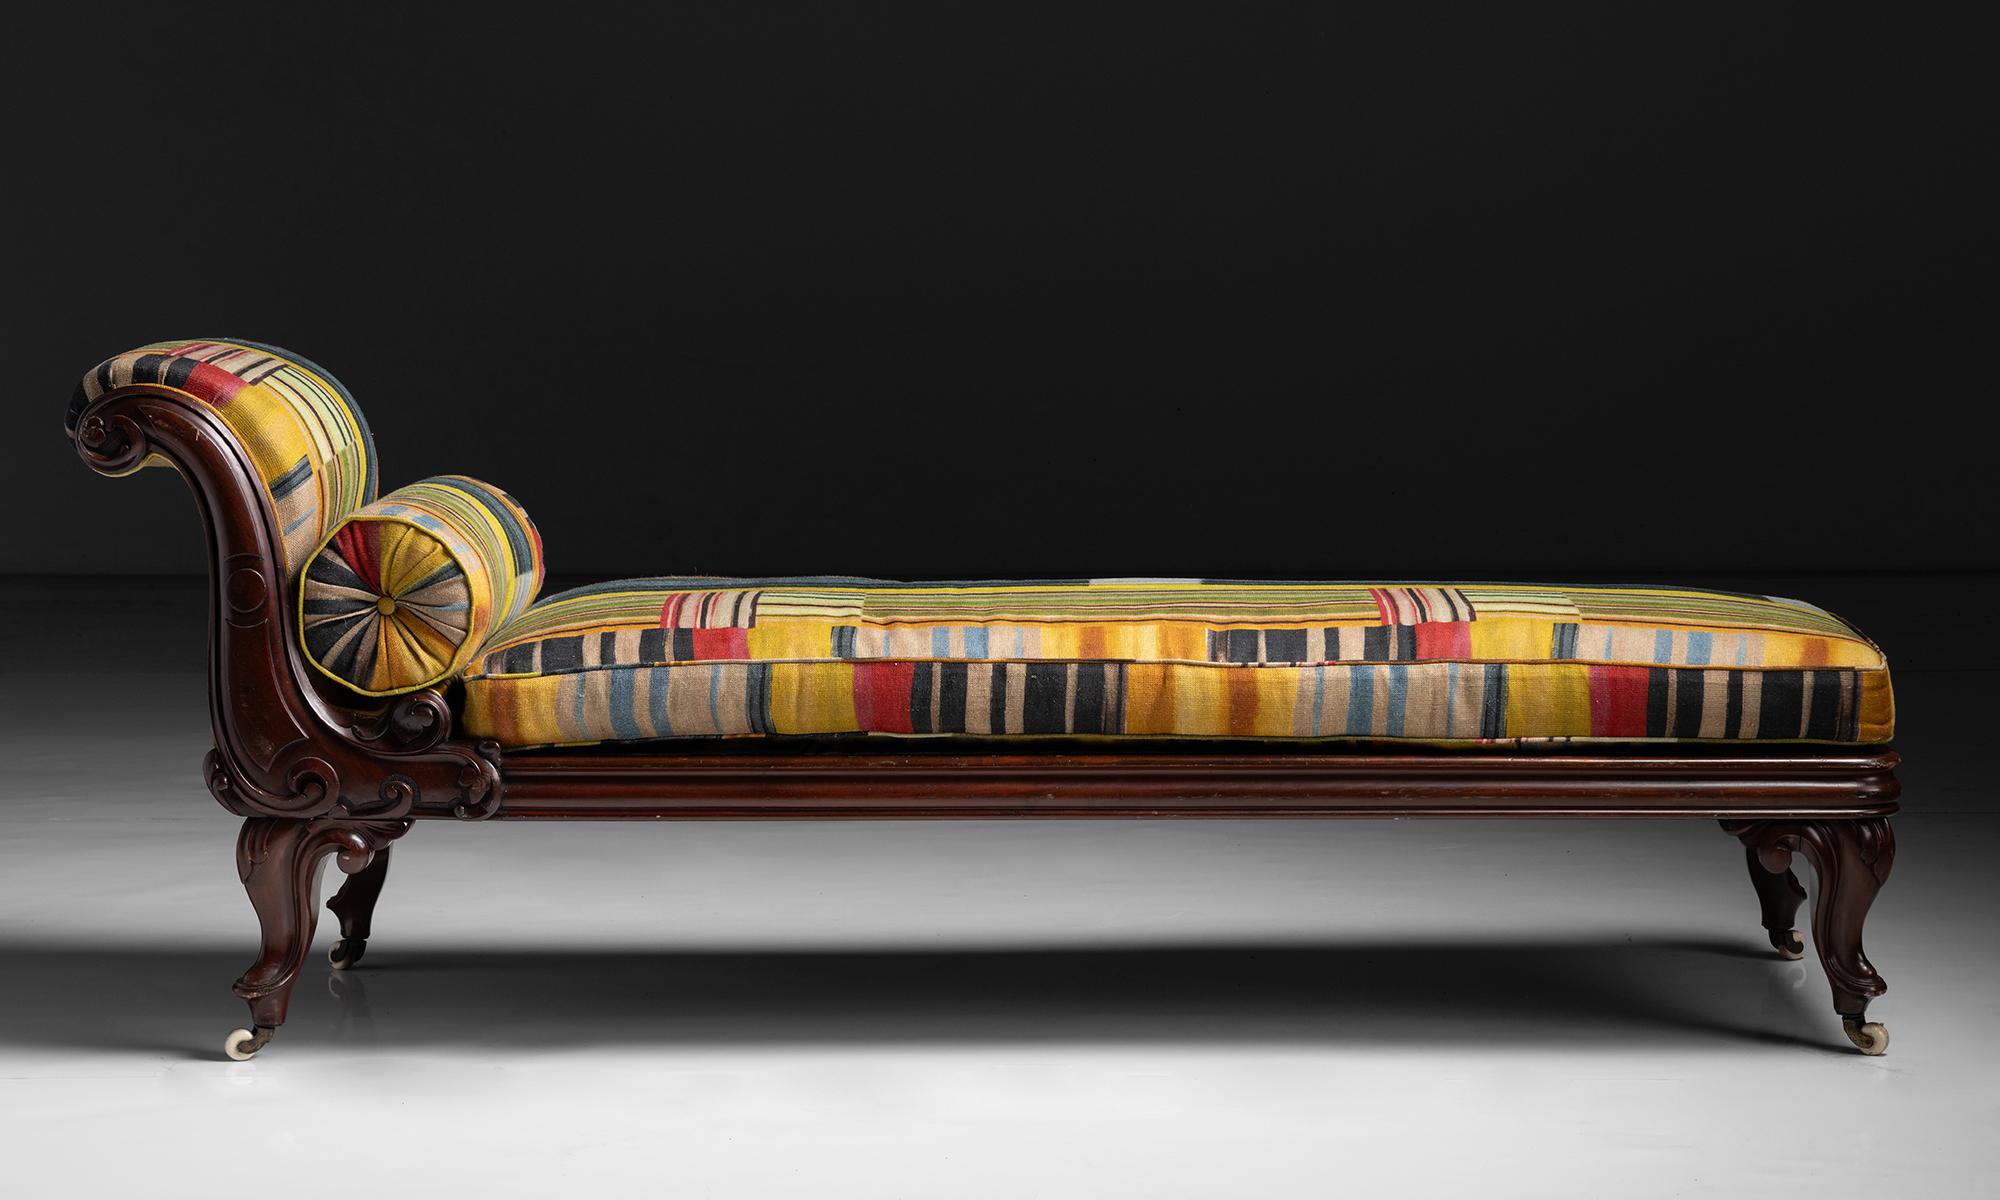 English Daybed in Striped Linen by Pierre Frey, England circa 1870